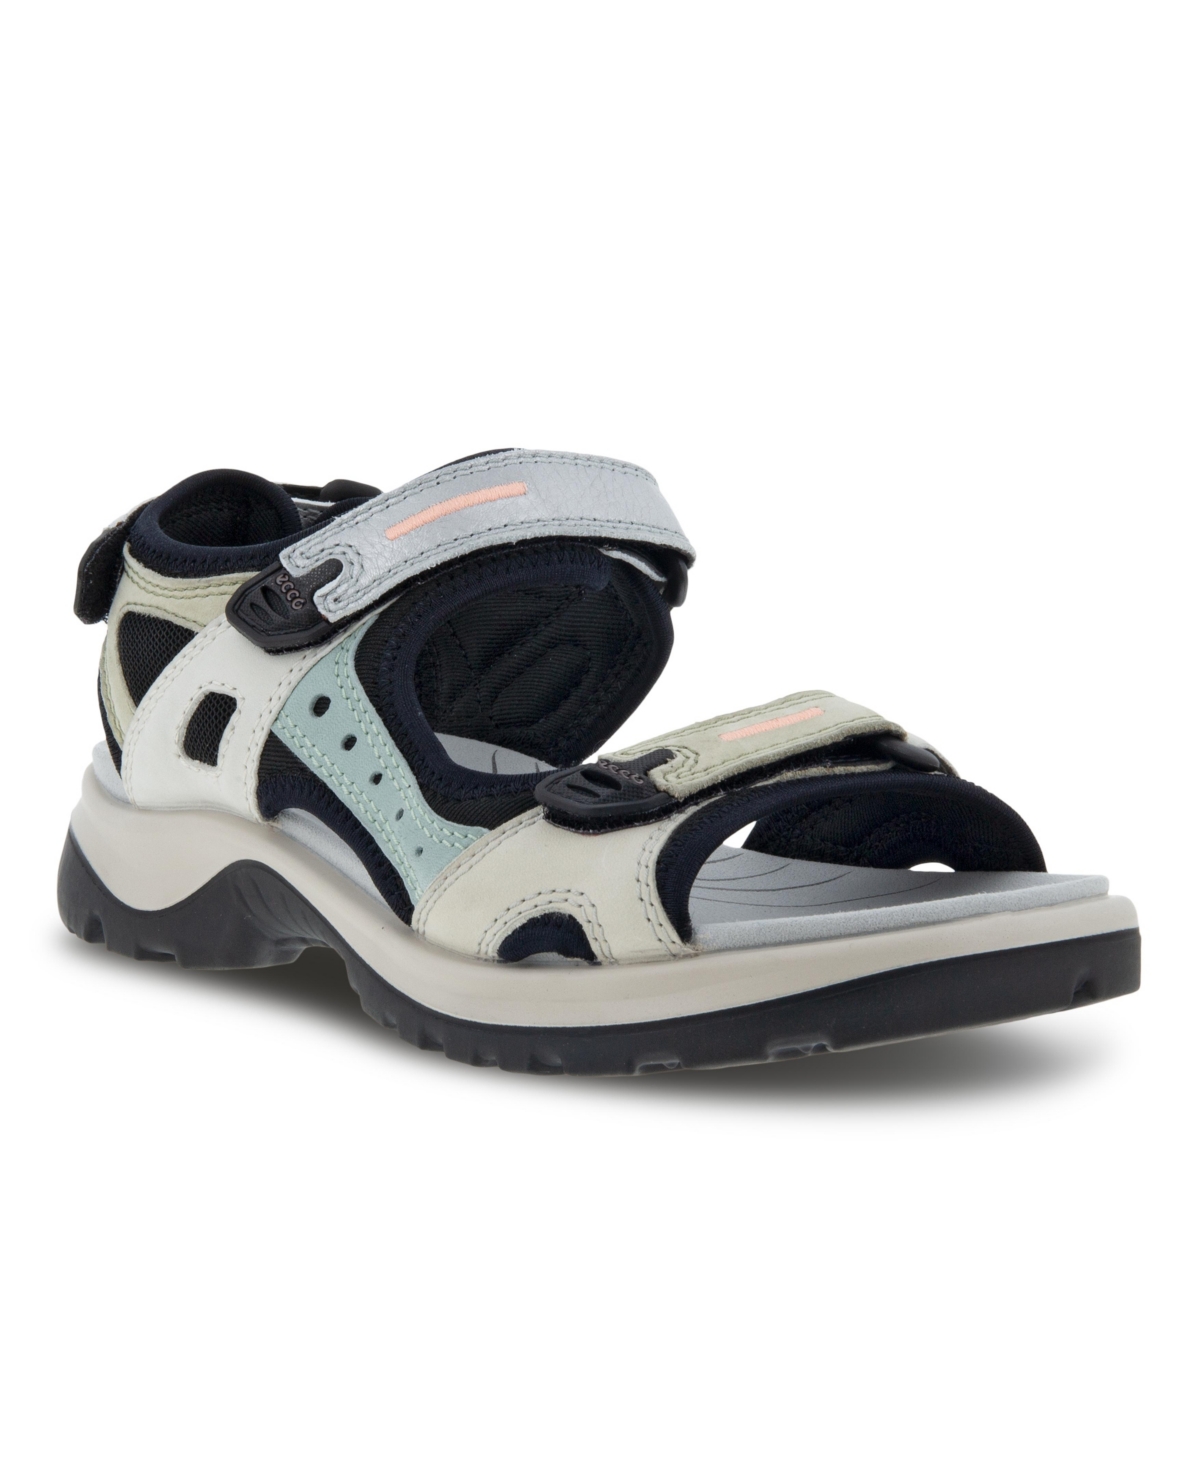 UPC 194891064255 product image for Ecco Women's Offroad Sandals Women's Shoes | upcitemdb.com